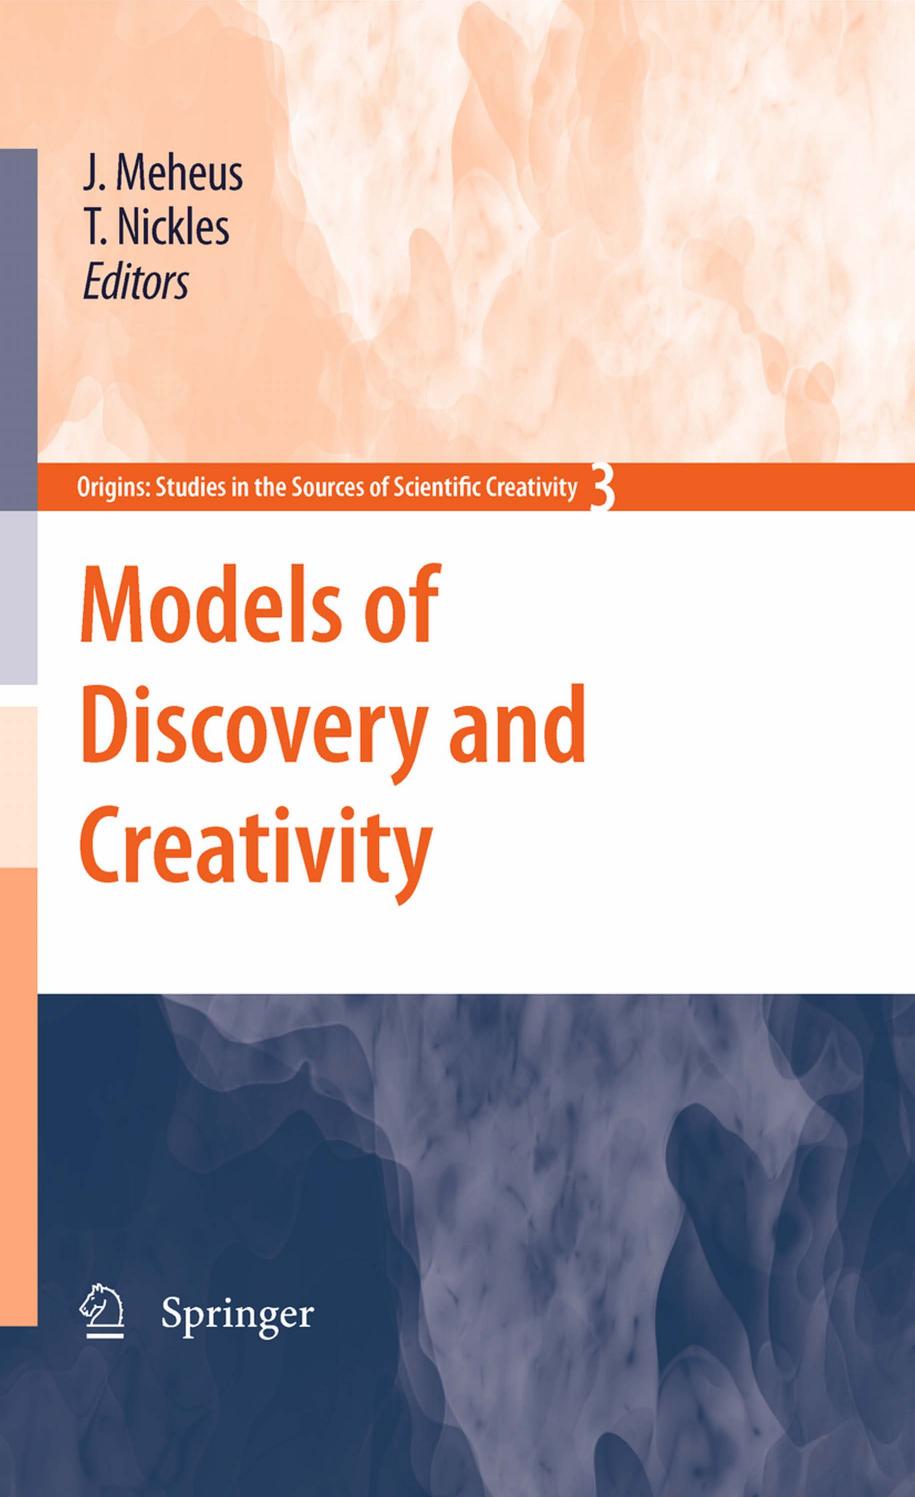 Models of Discovery and Creativity by J. Meheus